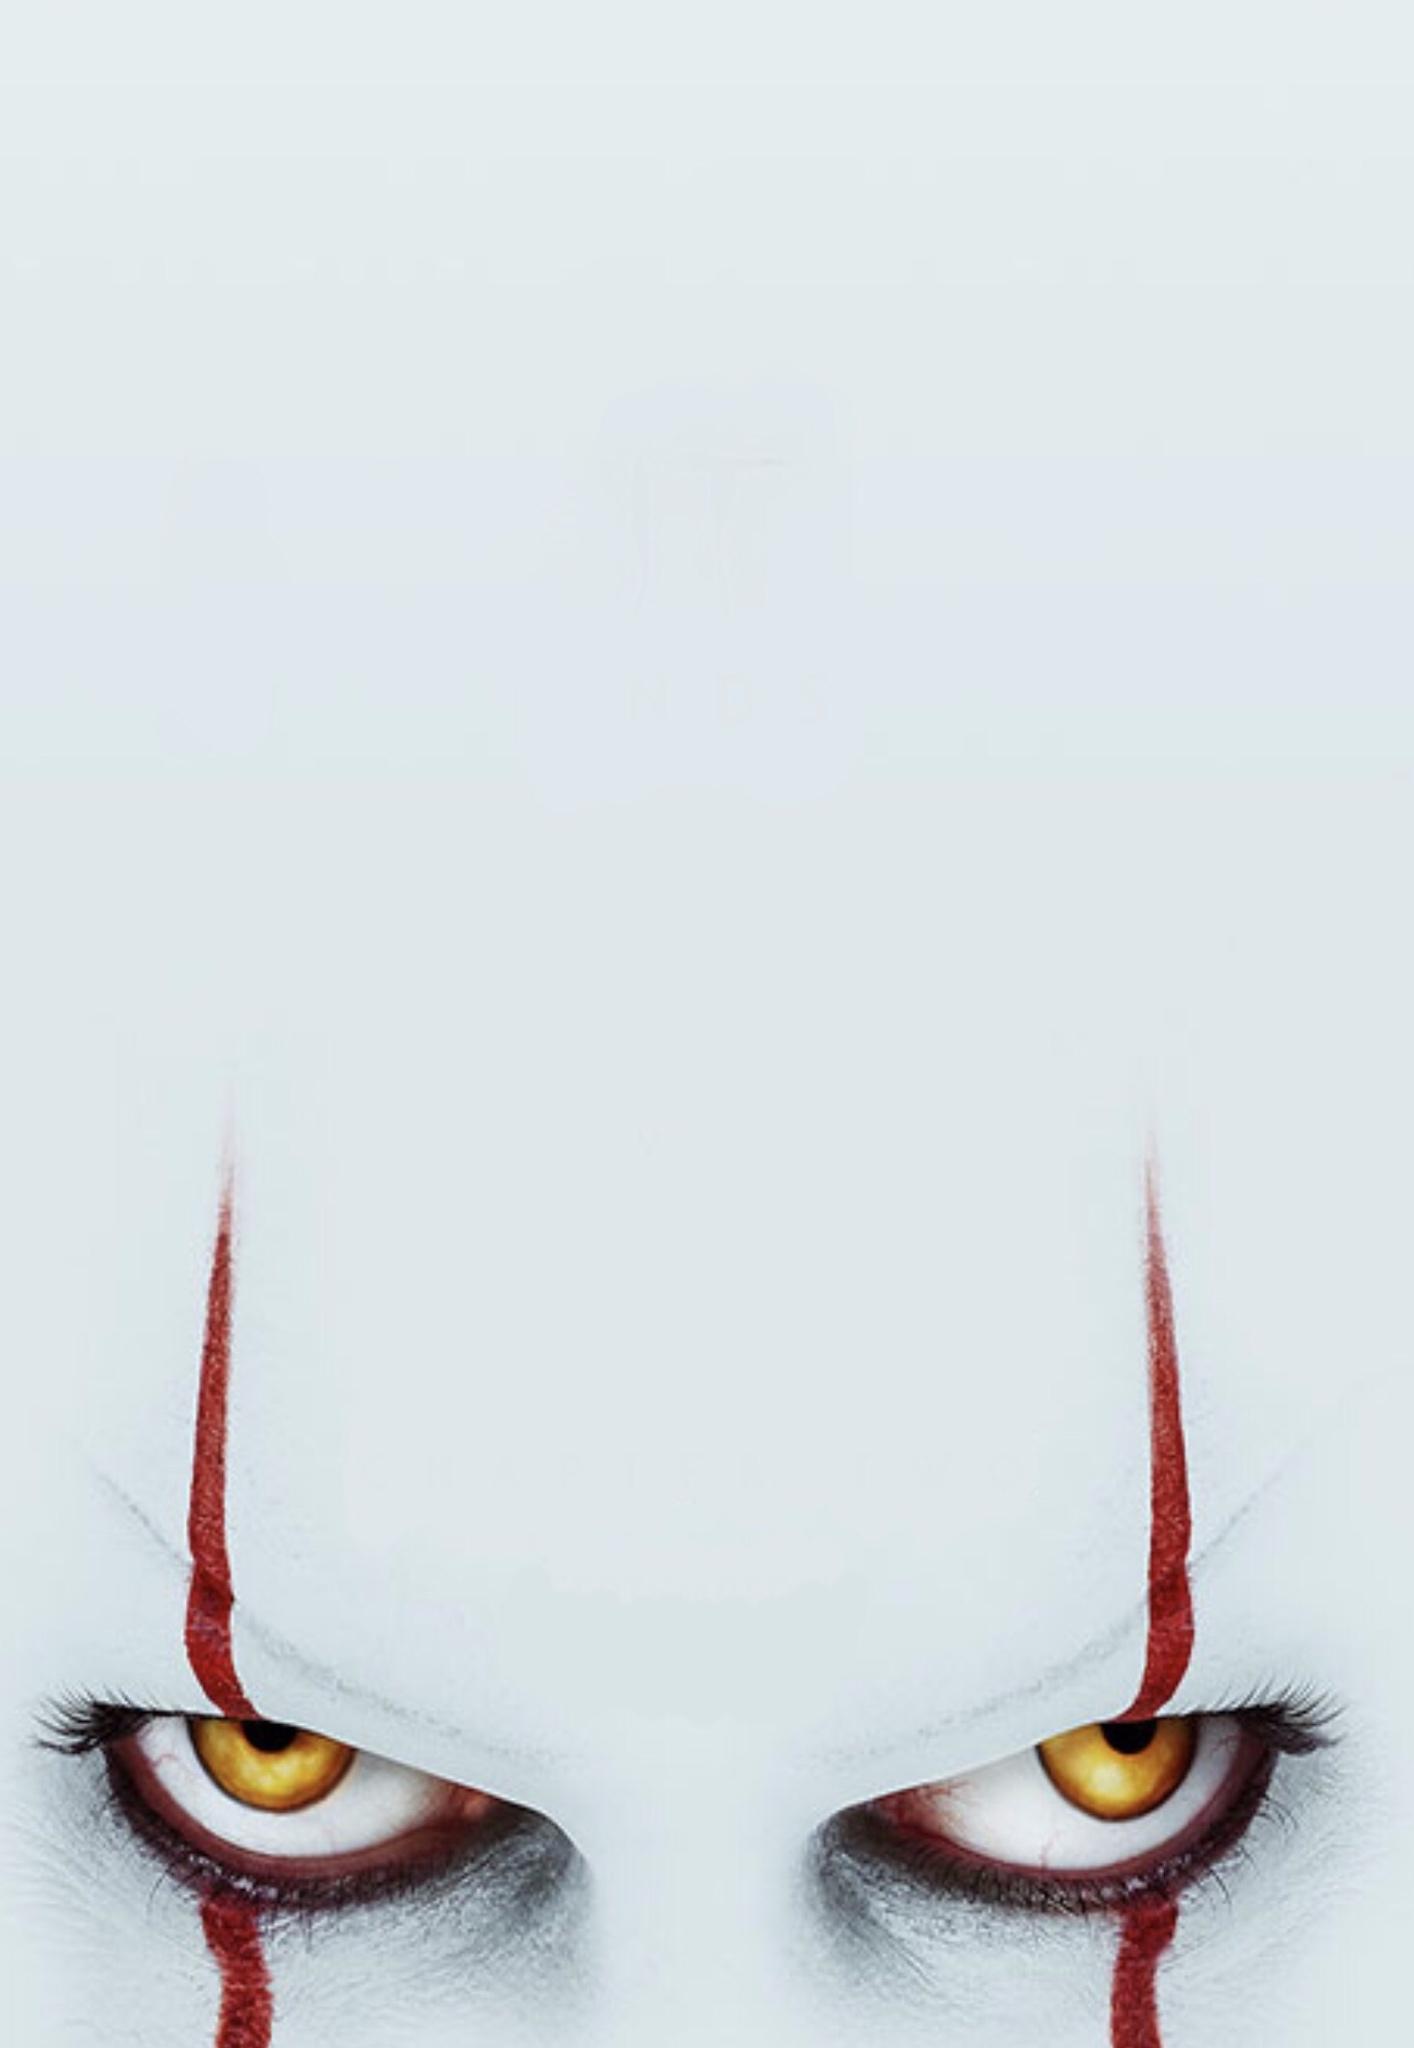 Pennywise IPhone wallpaper